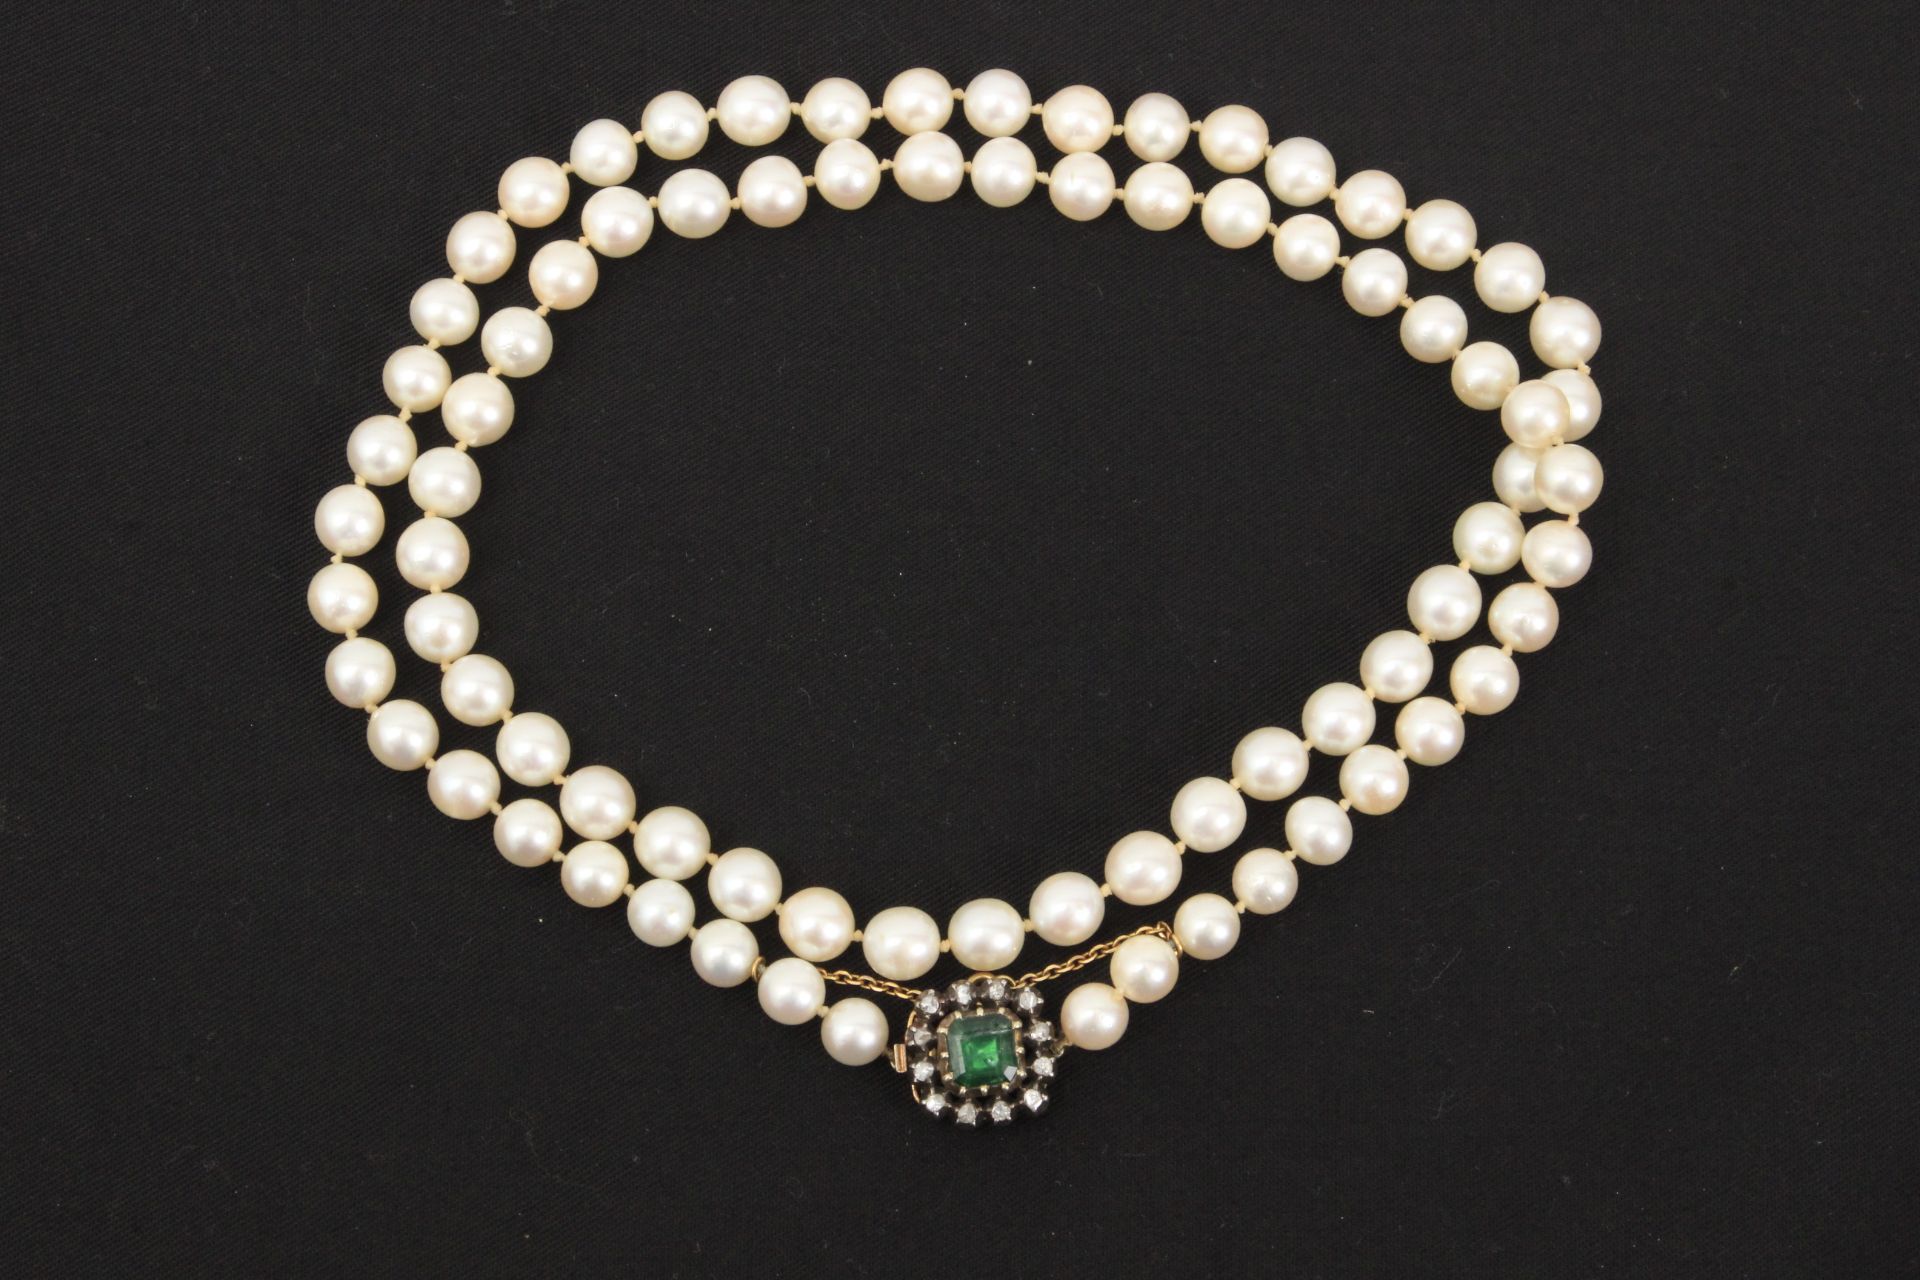 A cutured pearl necklace with an emerald and diamond brooch clasp